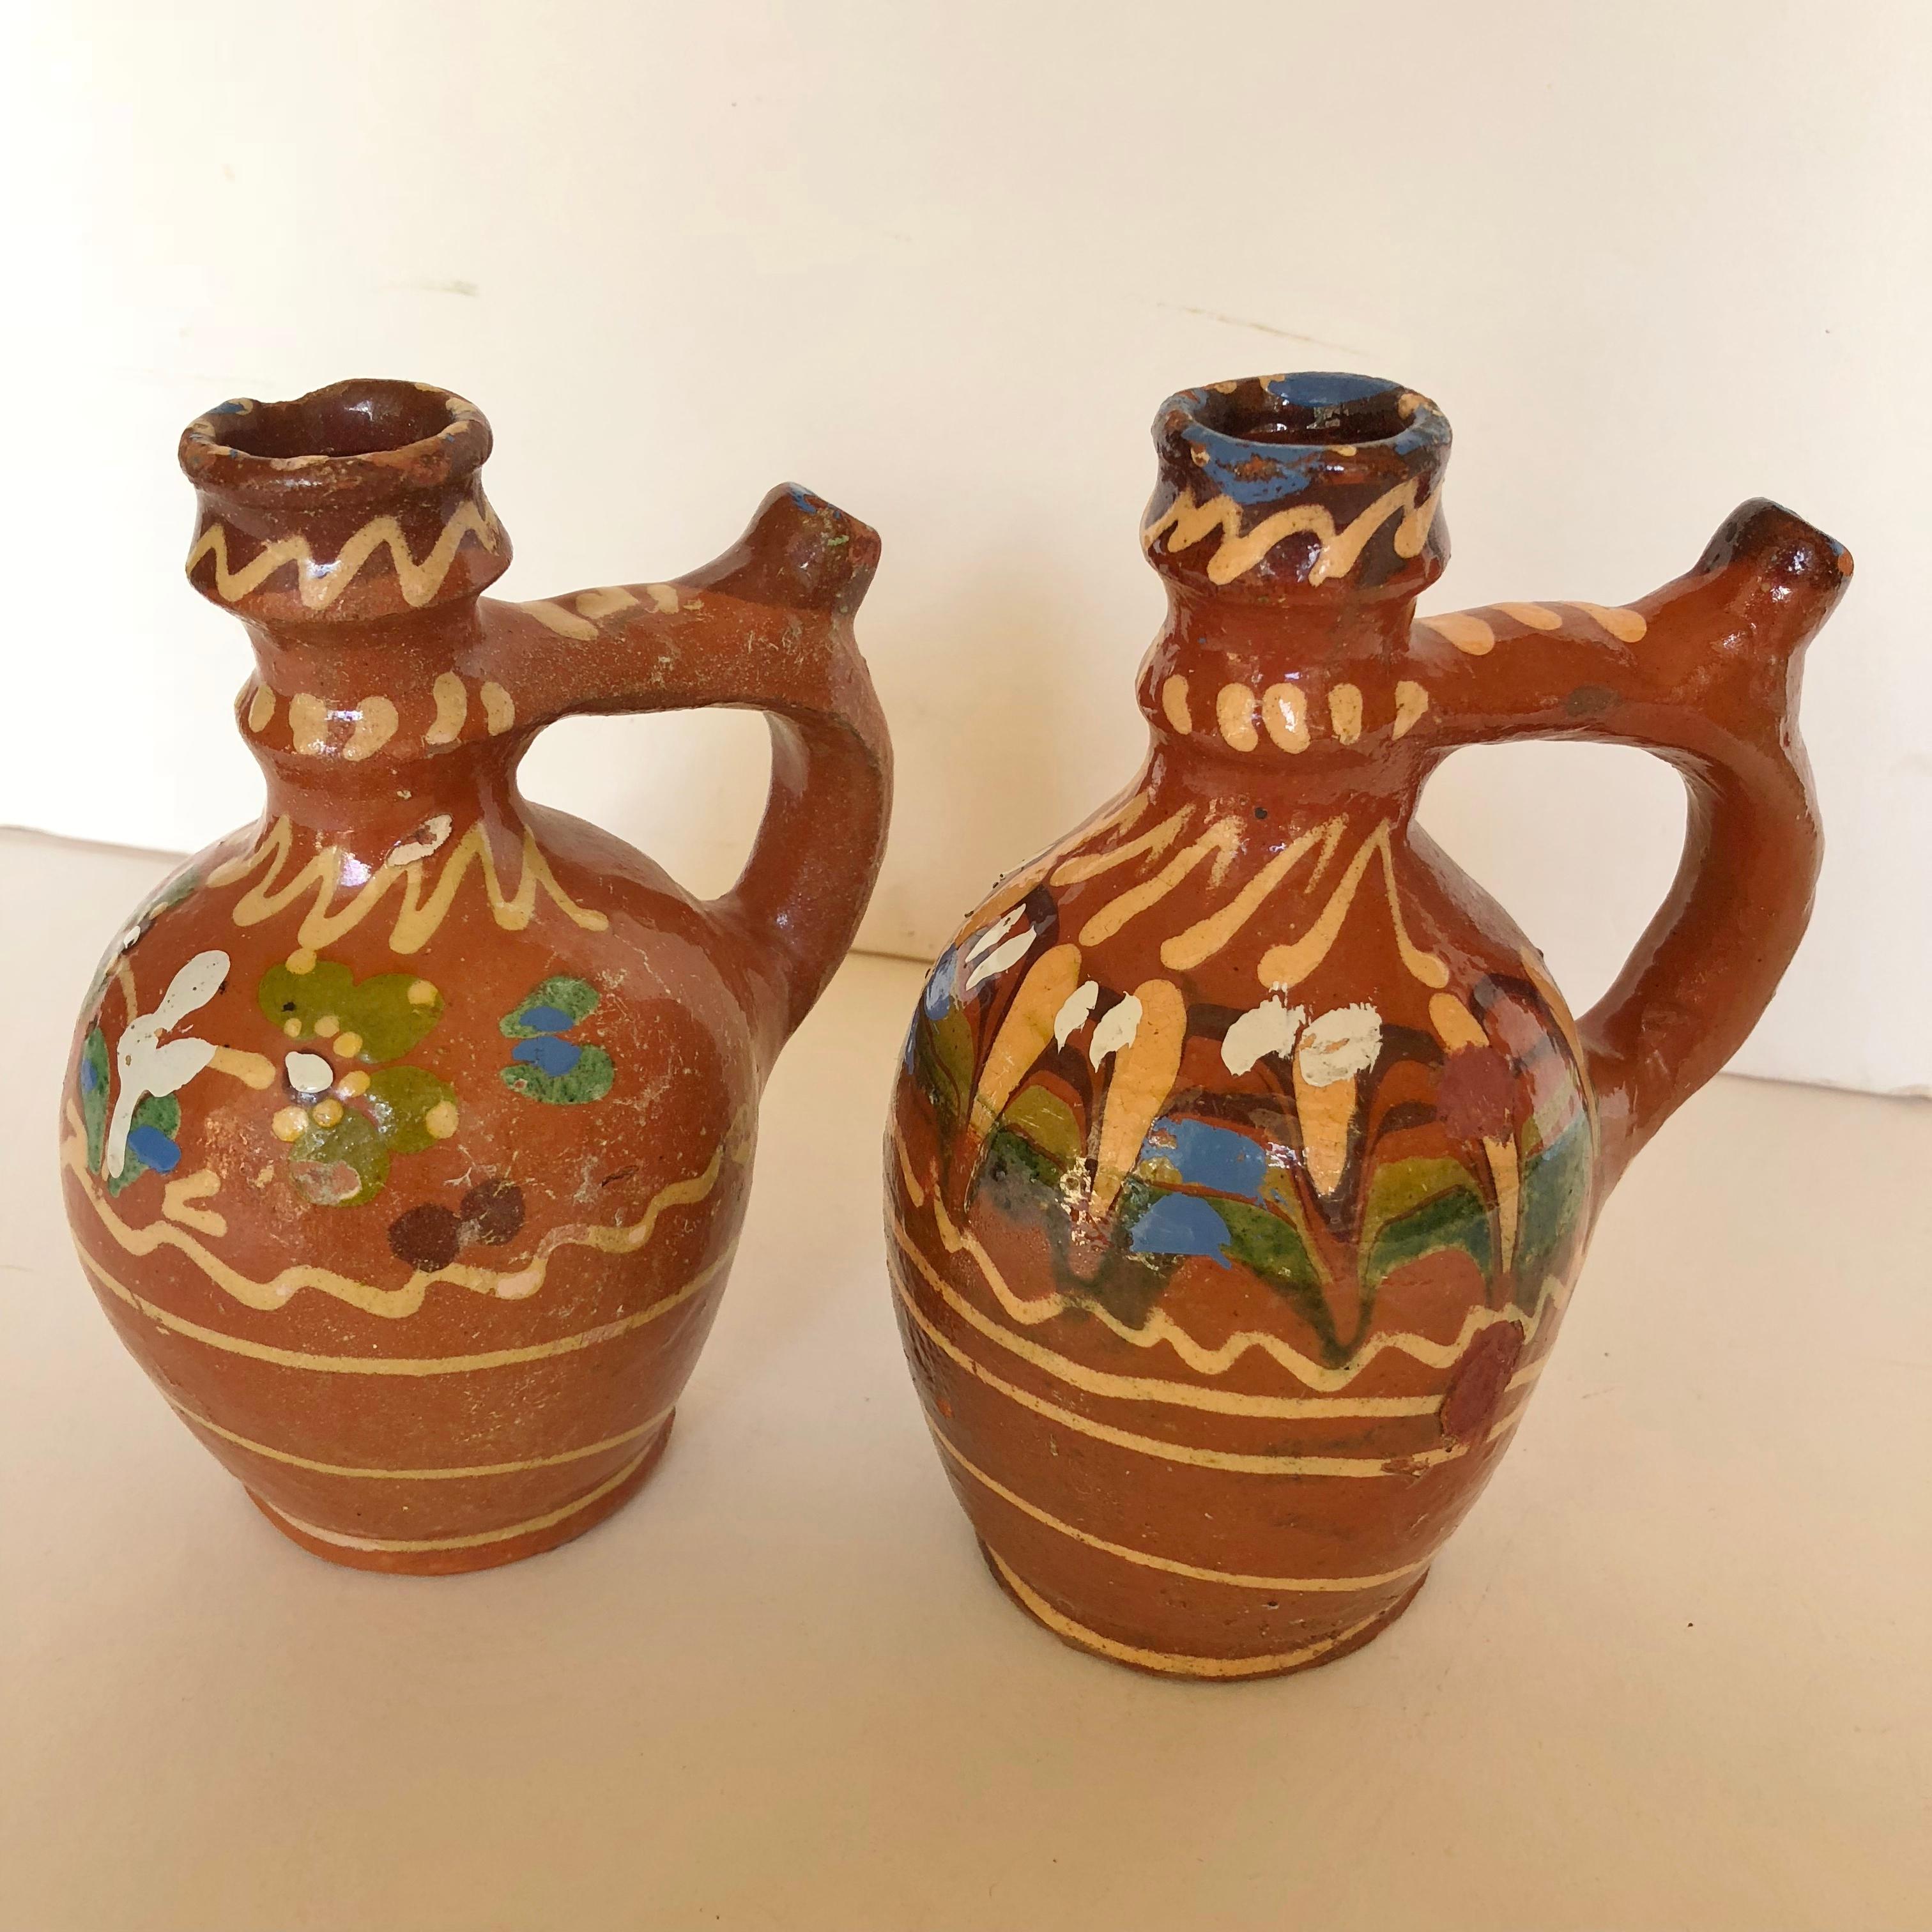 Group of Three Terracotta Pottery Folk Art Carafes from Transylvania, Serbia For Sale 6